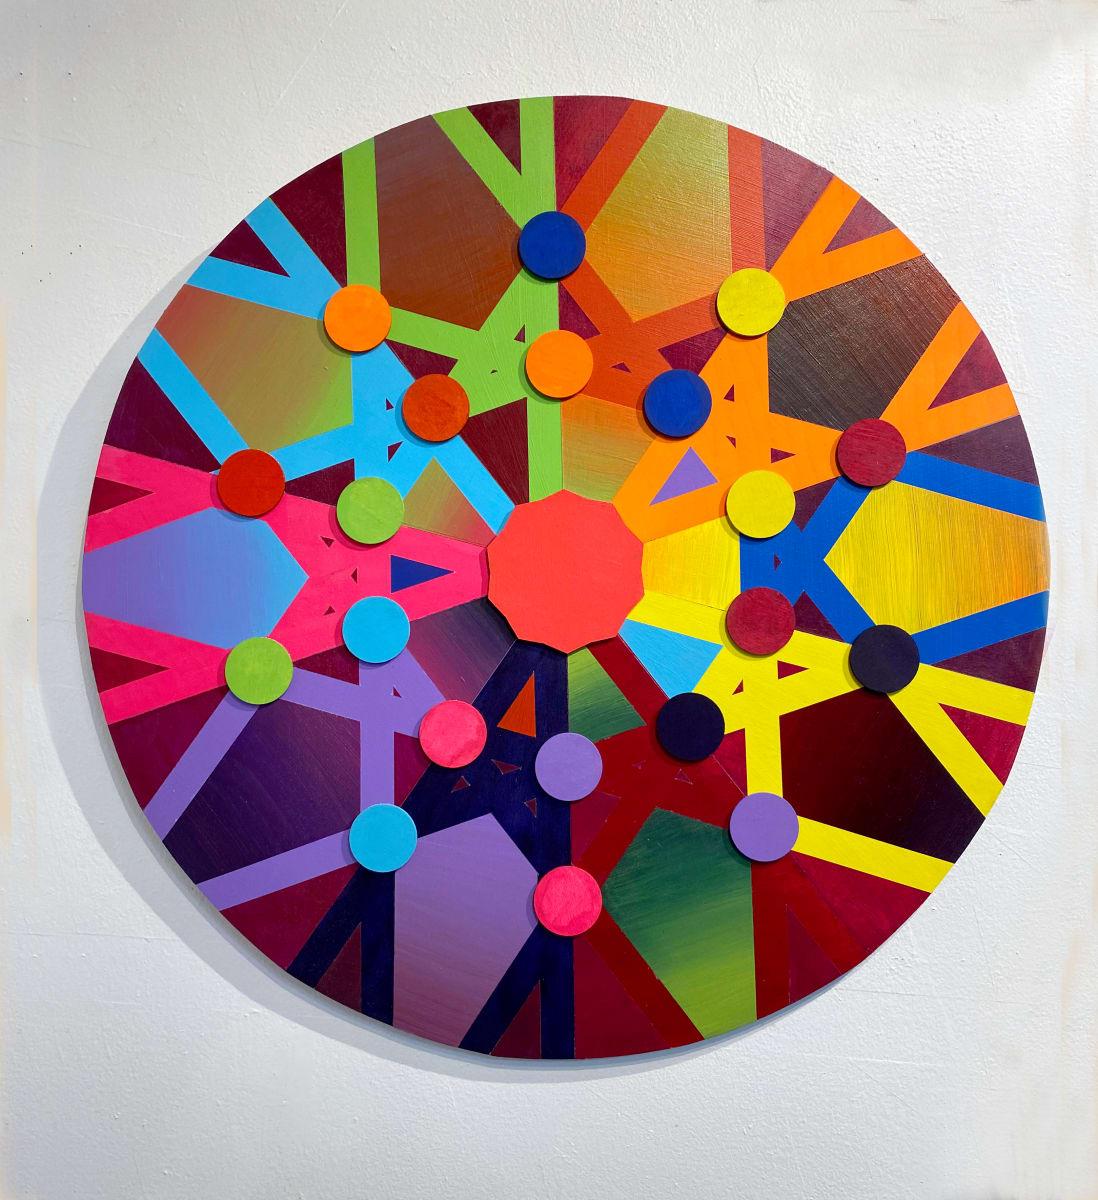 Allotropy, Acrylic on Wood by Christine Romanell

Christine Romanell’s colorful wall sculptures and installations explore non-repeating patterns informed by cosmology and physics, while rooting itself in applied design similar to Islamic patterning.